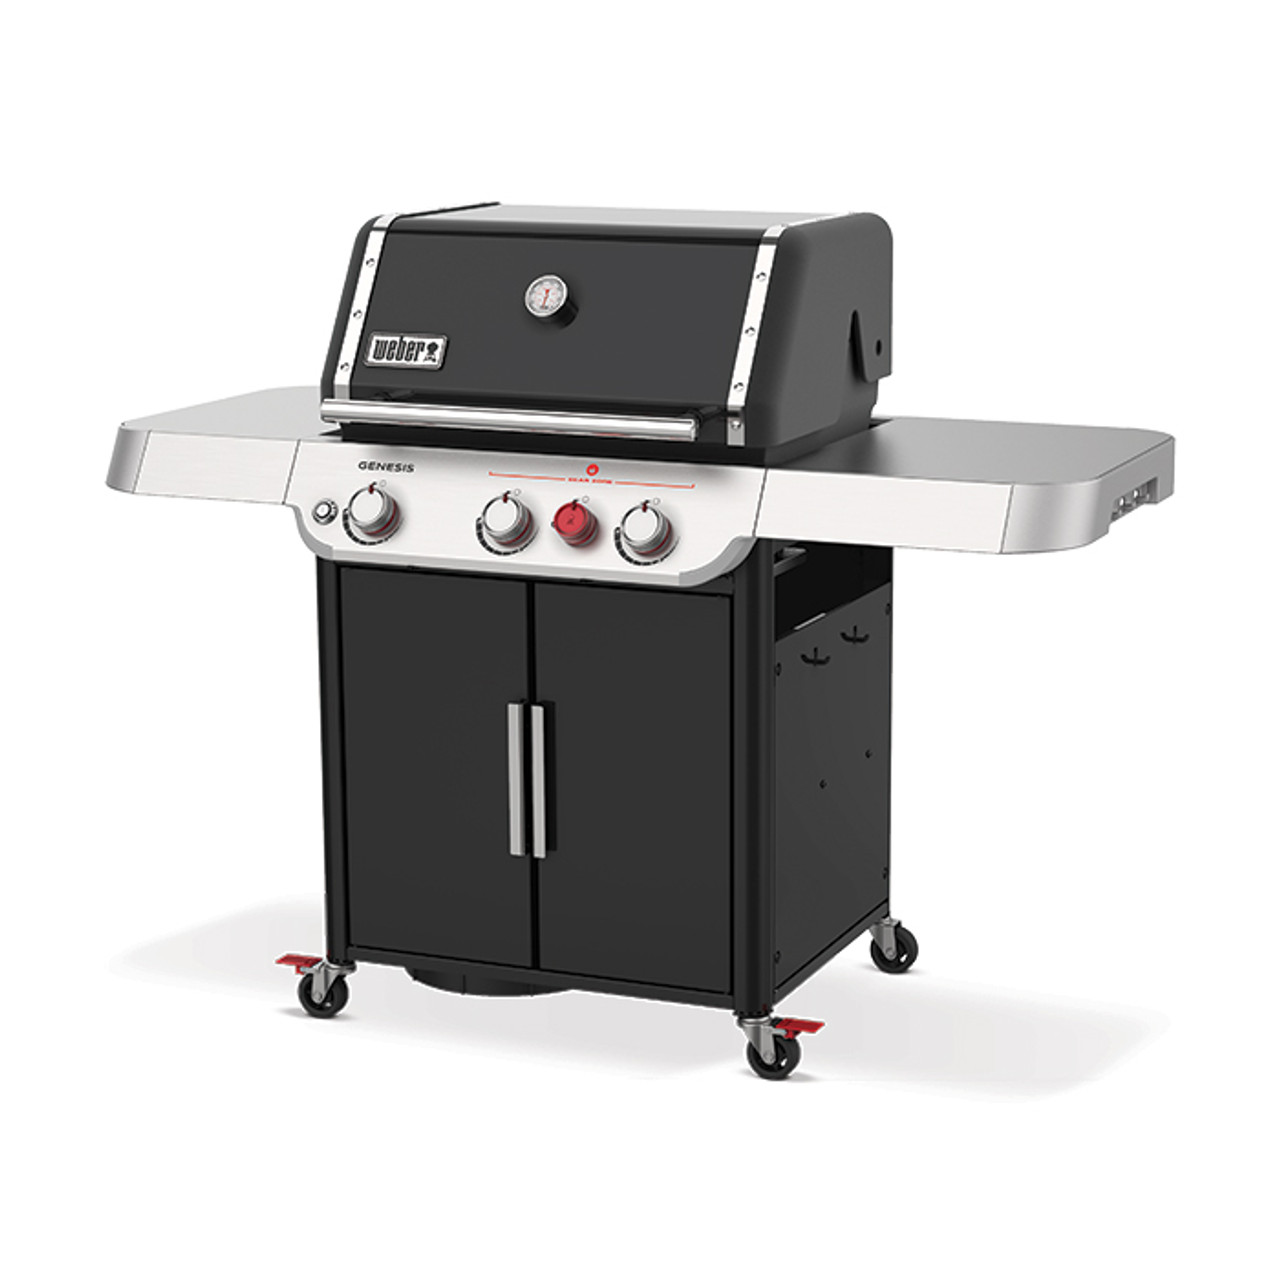 Weber® Genesis® E-325s *FREE ROASTER & THERMOMETER